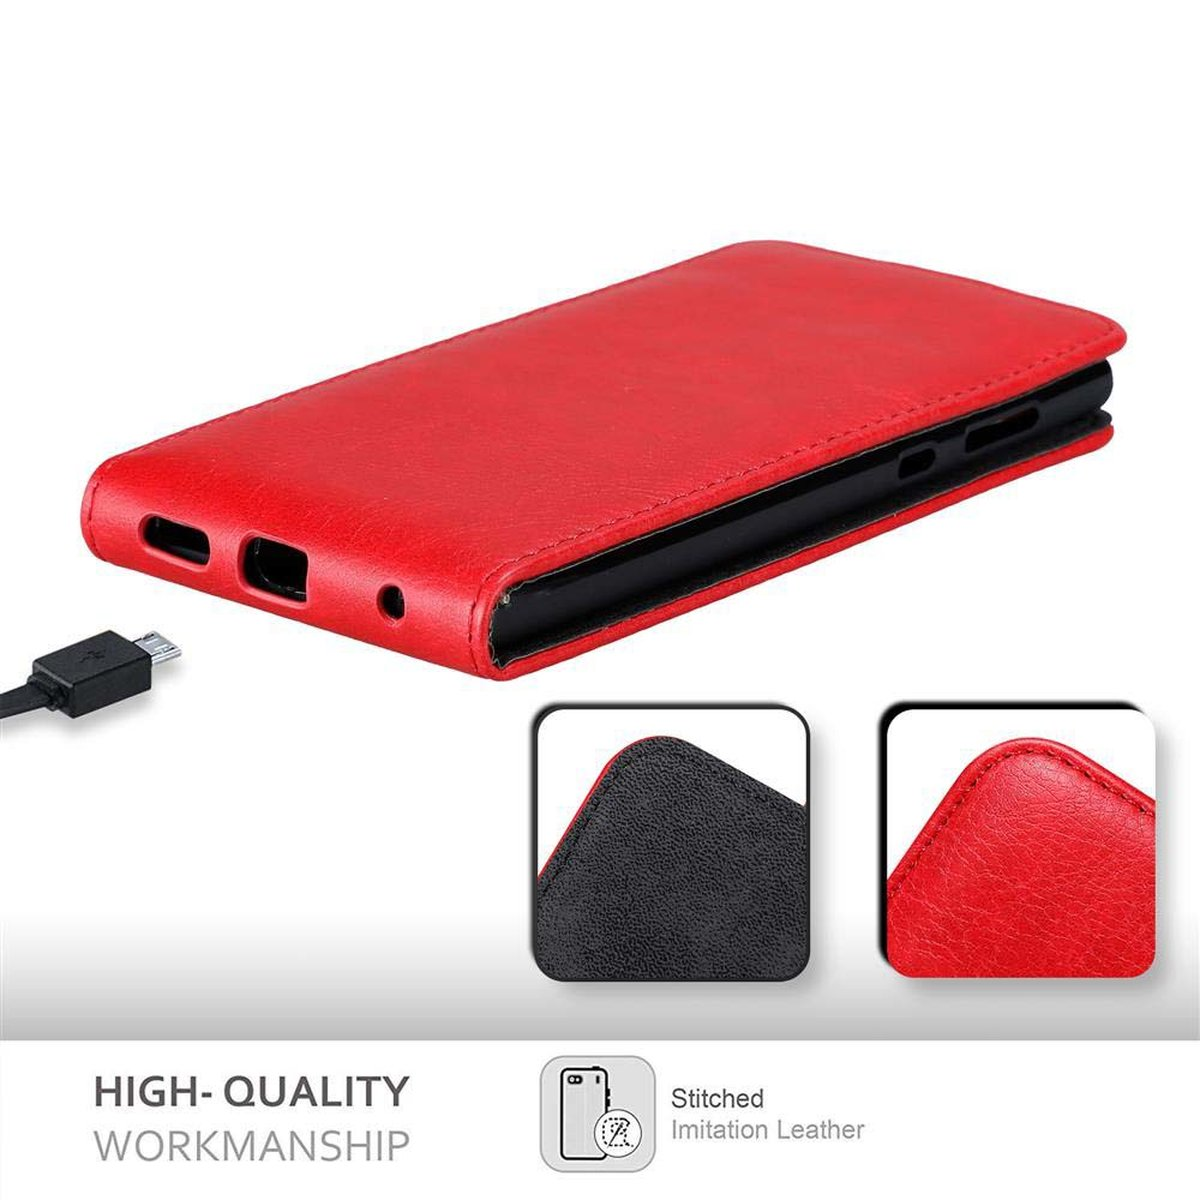 Sony, Hülle CADORABO ROT Flip Style, Xperia im Flip Cover, L1, APFEL